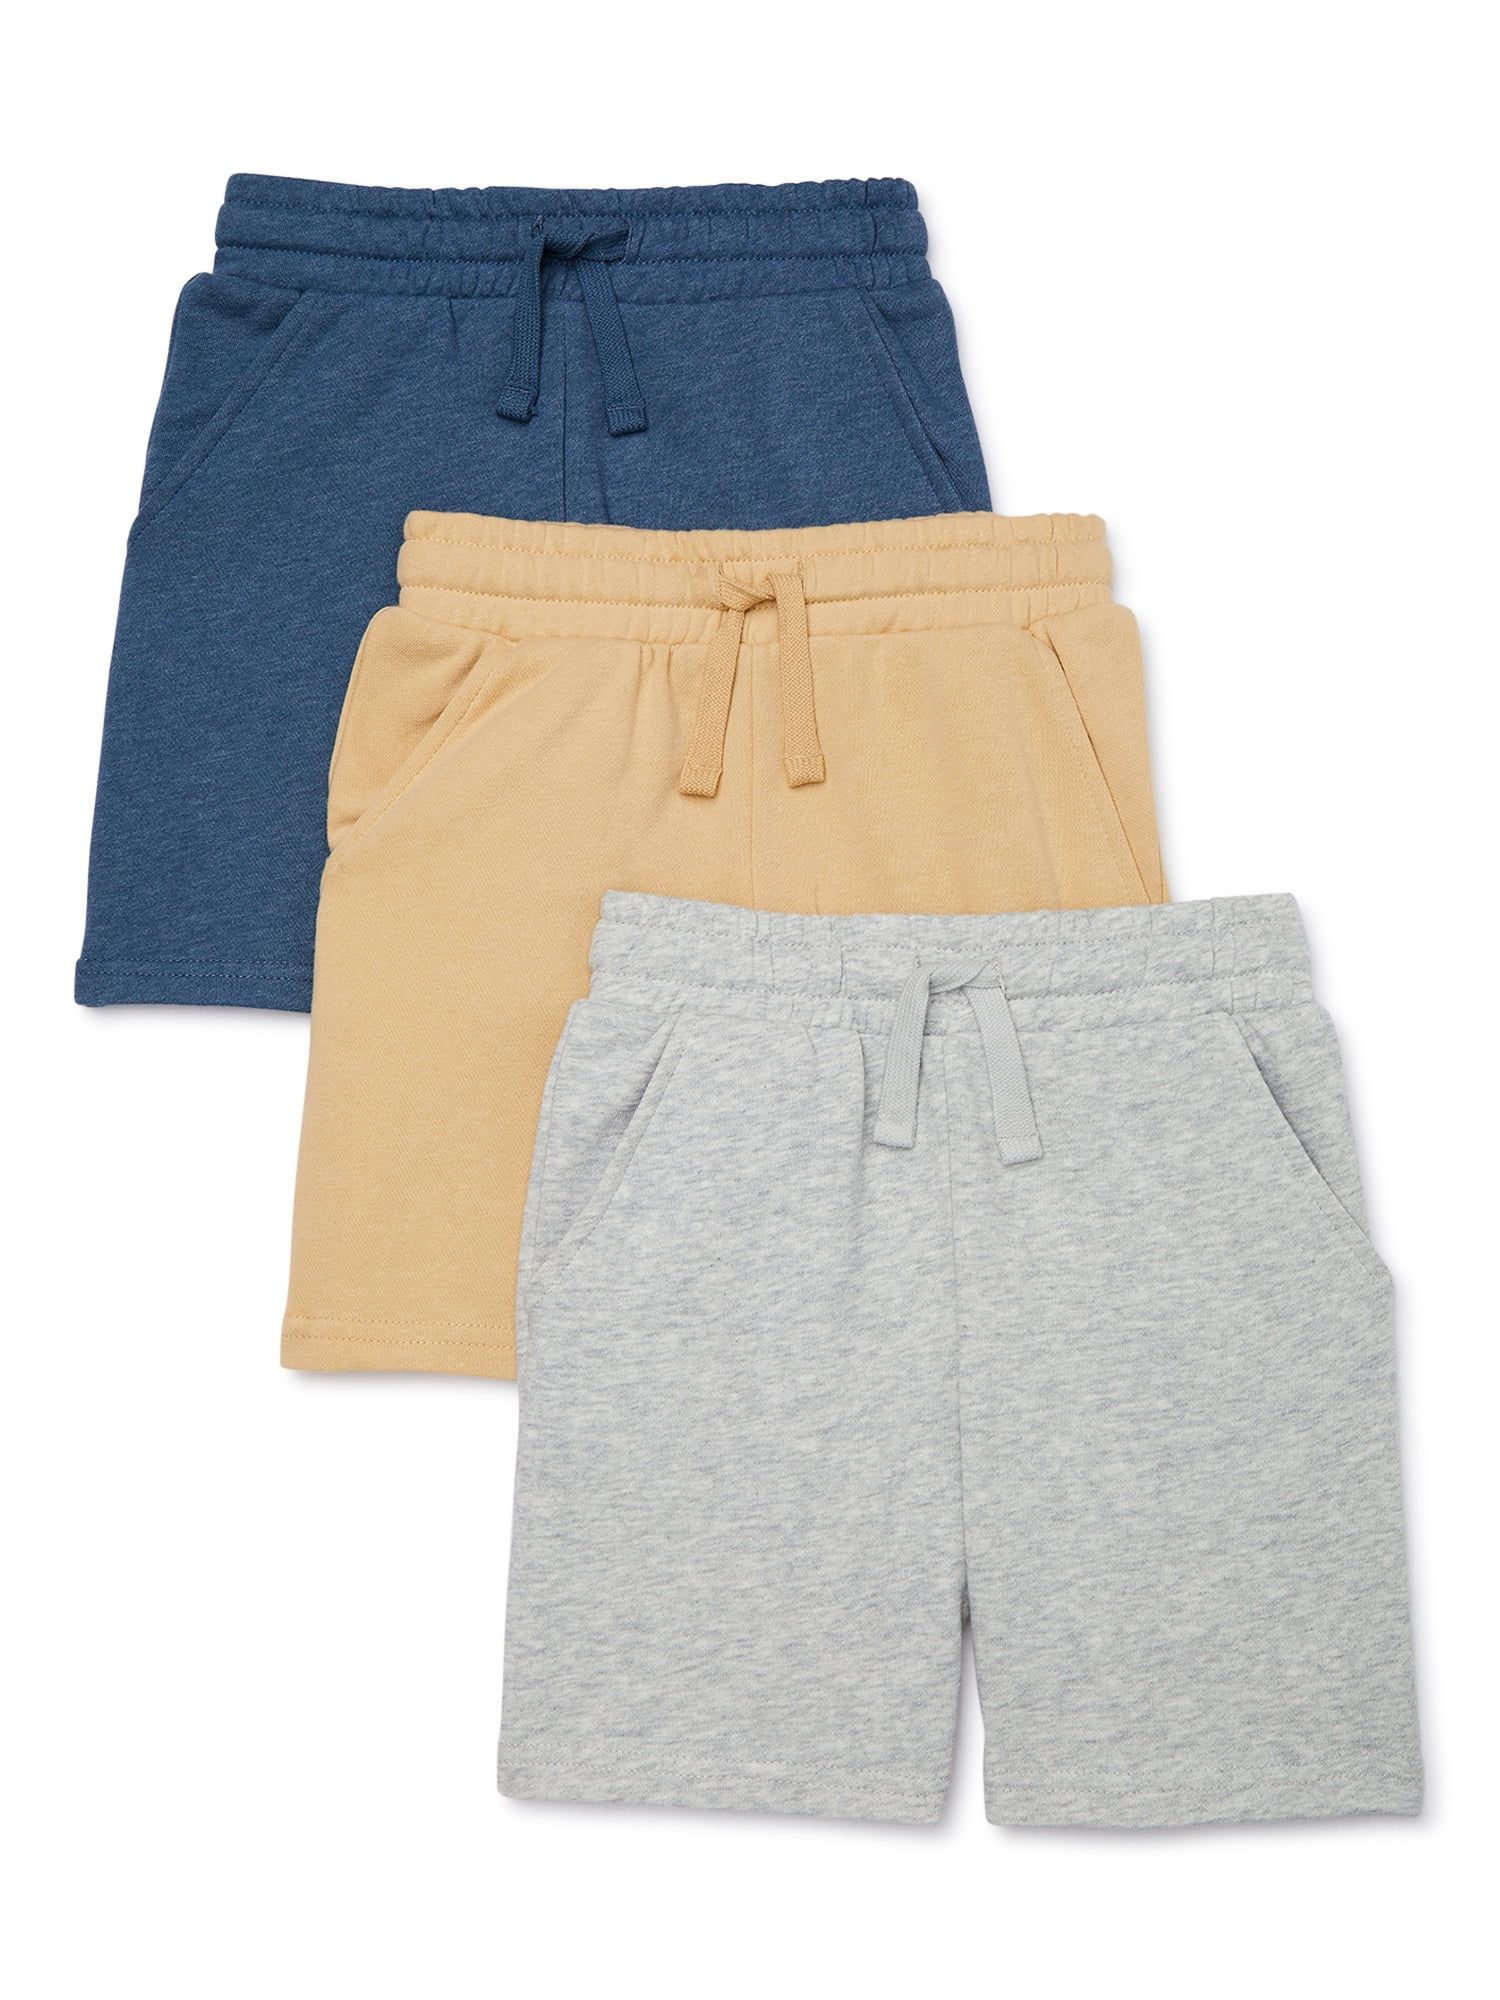 365 Kids from Garanimals Boys Mix and Match French Terry Shorts, 3-Pack, Sizes 4-10 | Walmart (US)